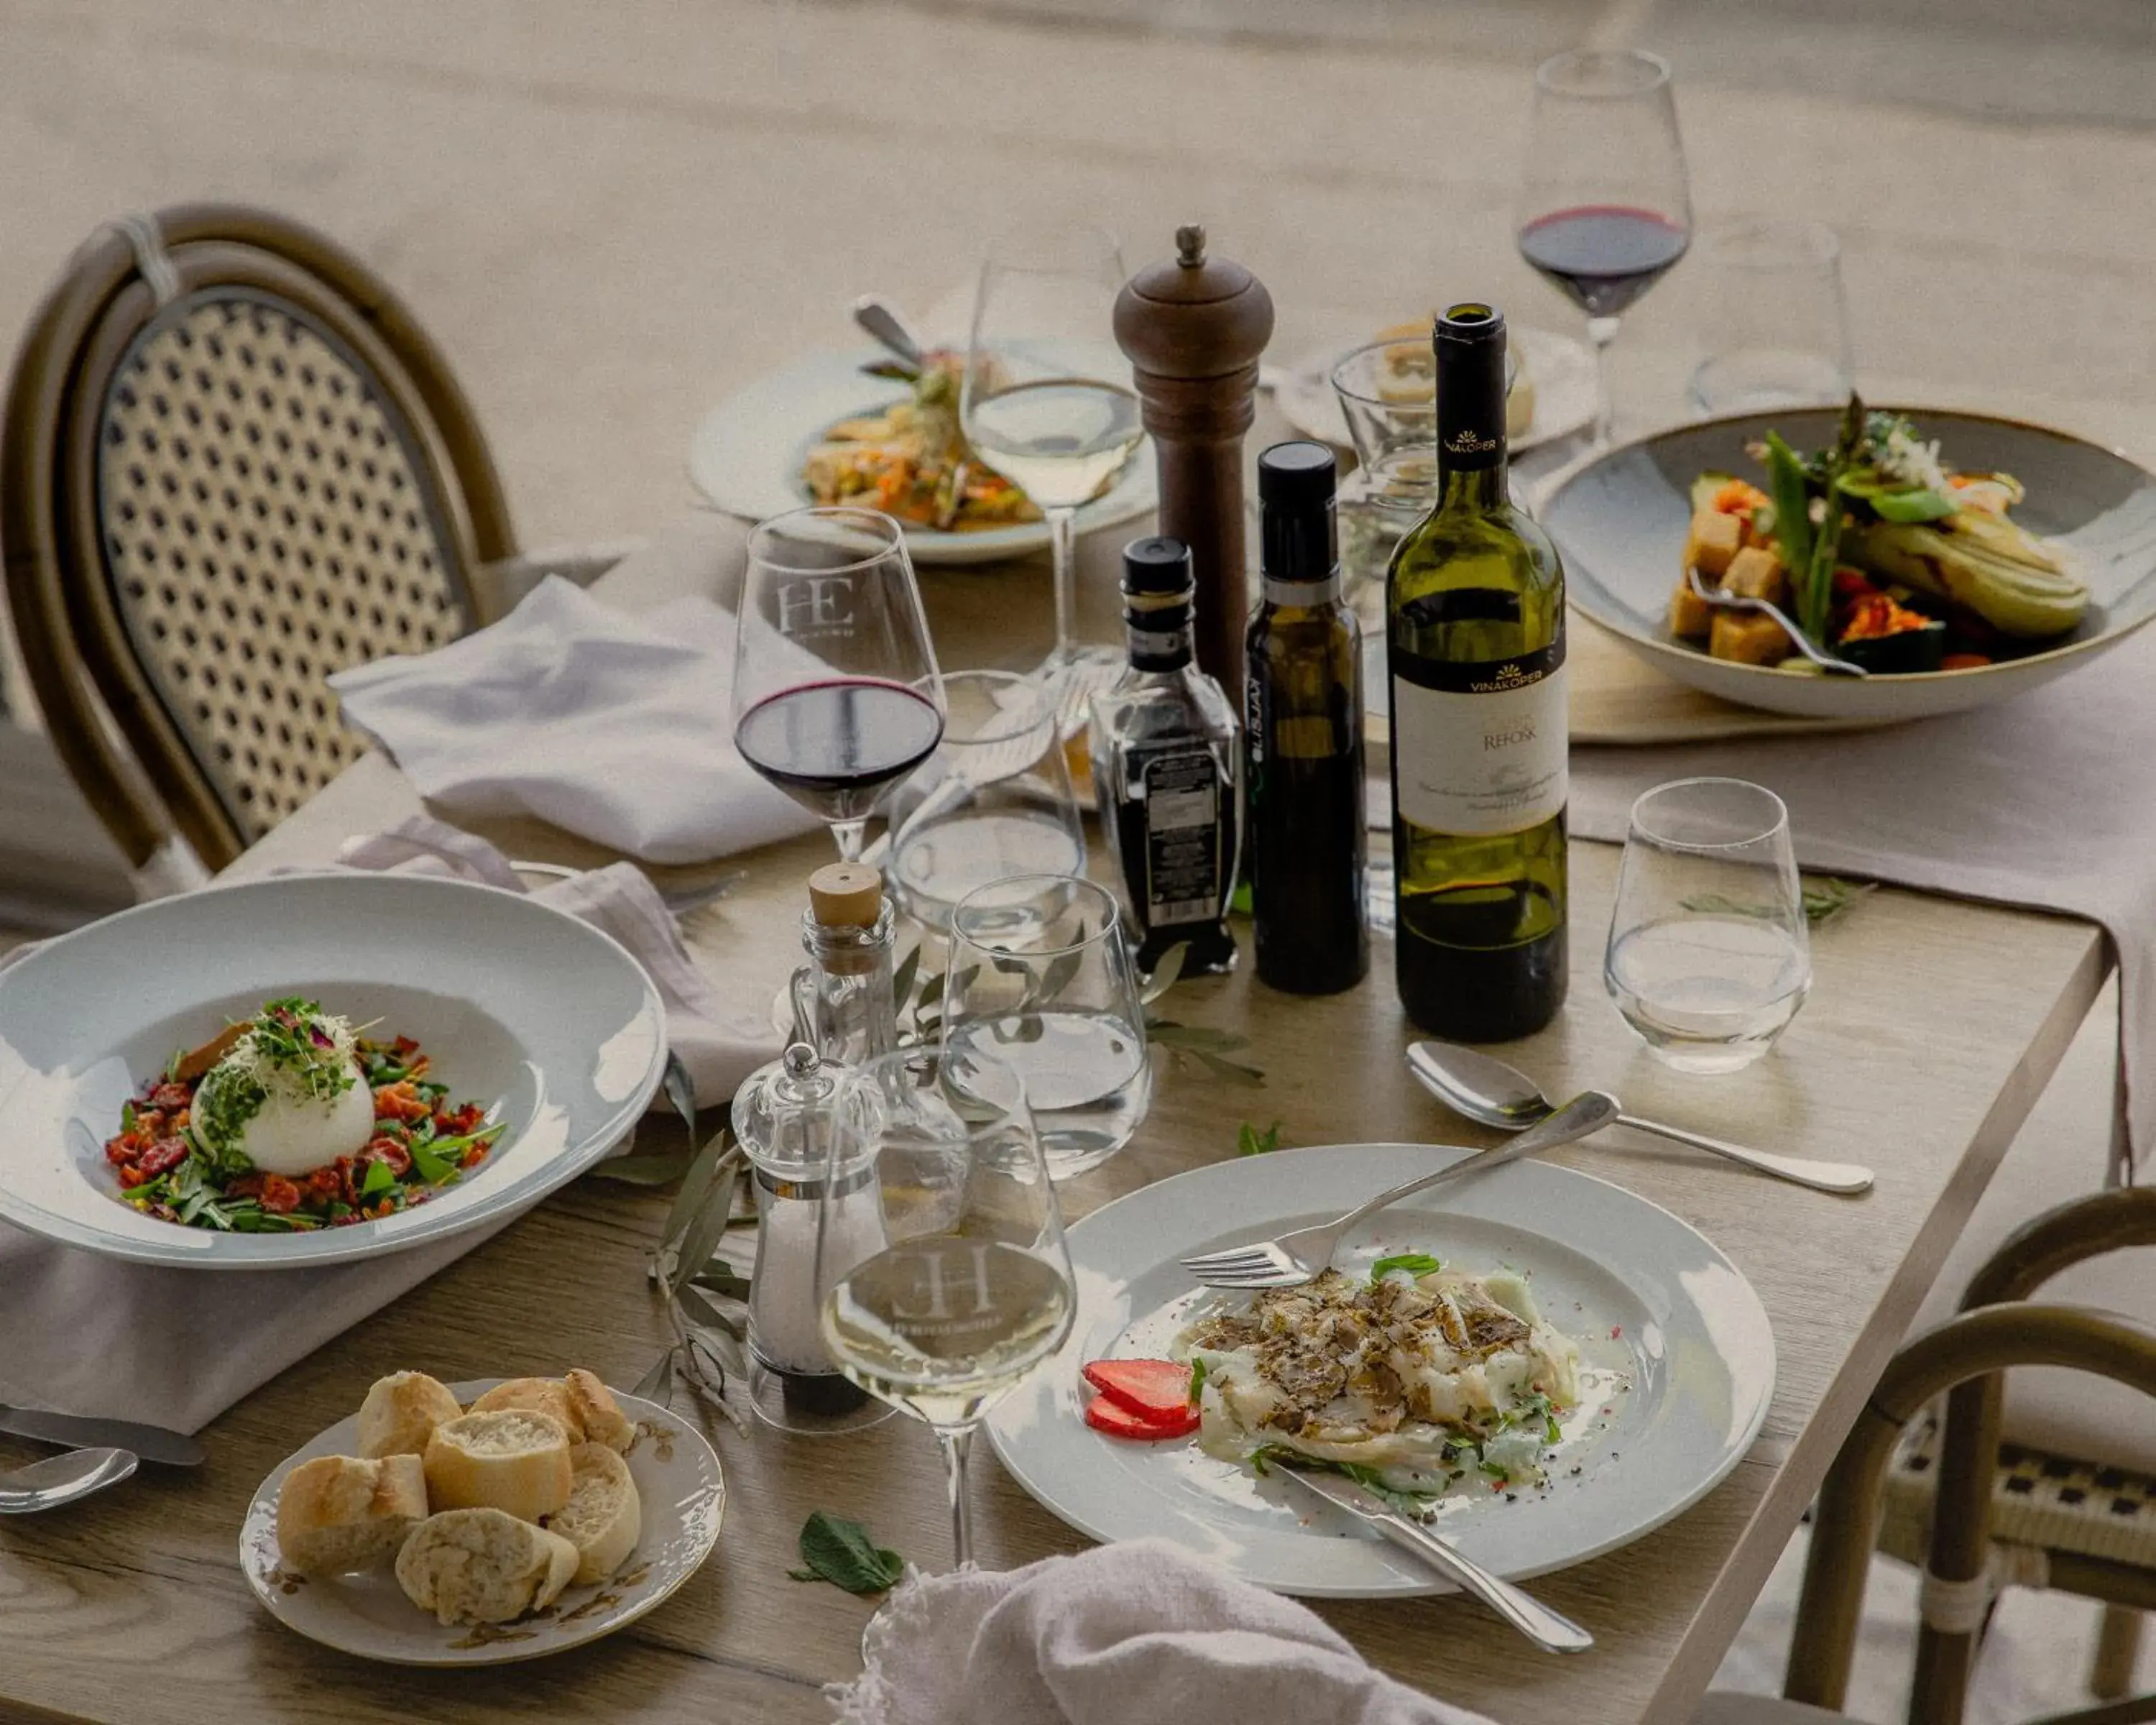 Food, Lunch and Dinner in Hotel Piran